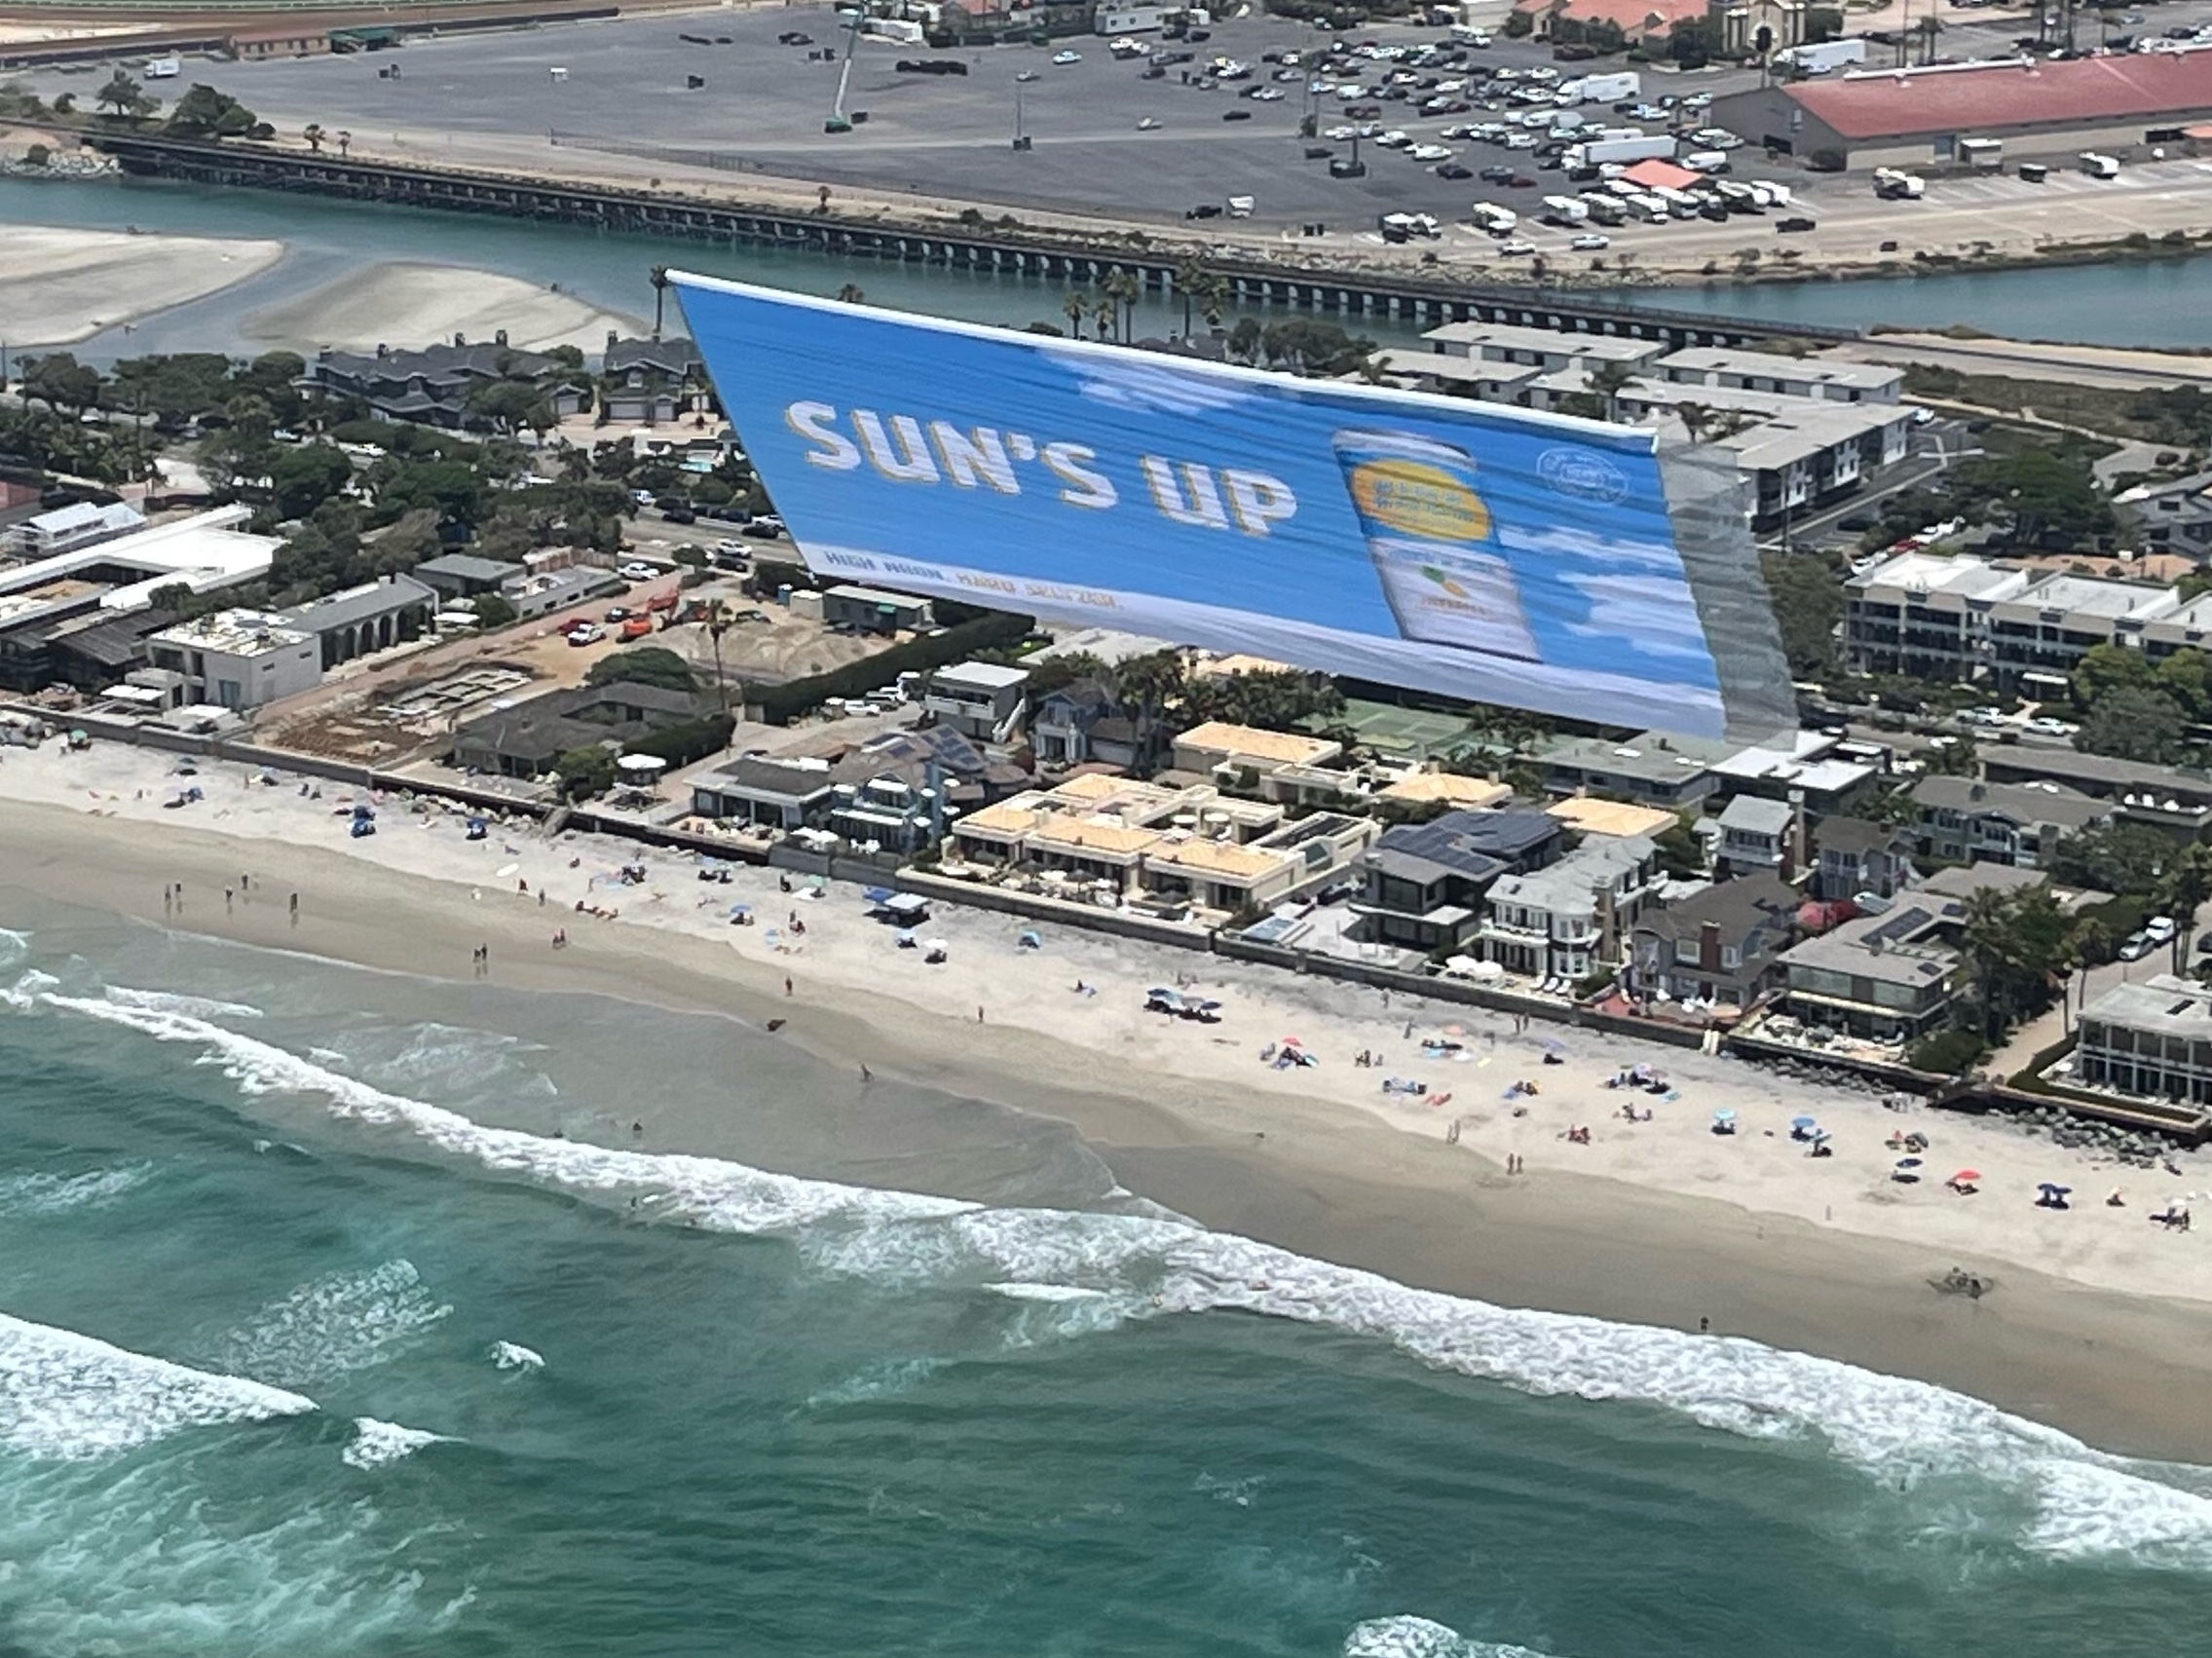 High Noon Aerial Billboard hovers over San Diego Beaches